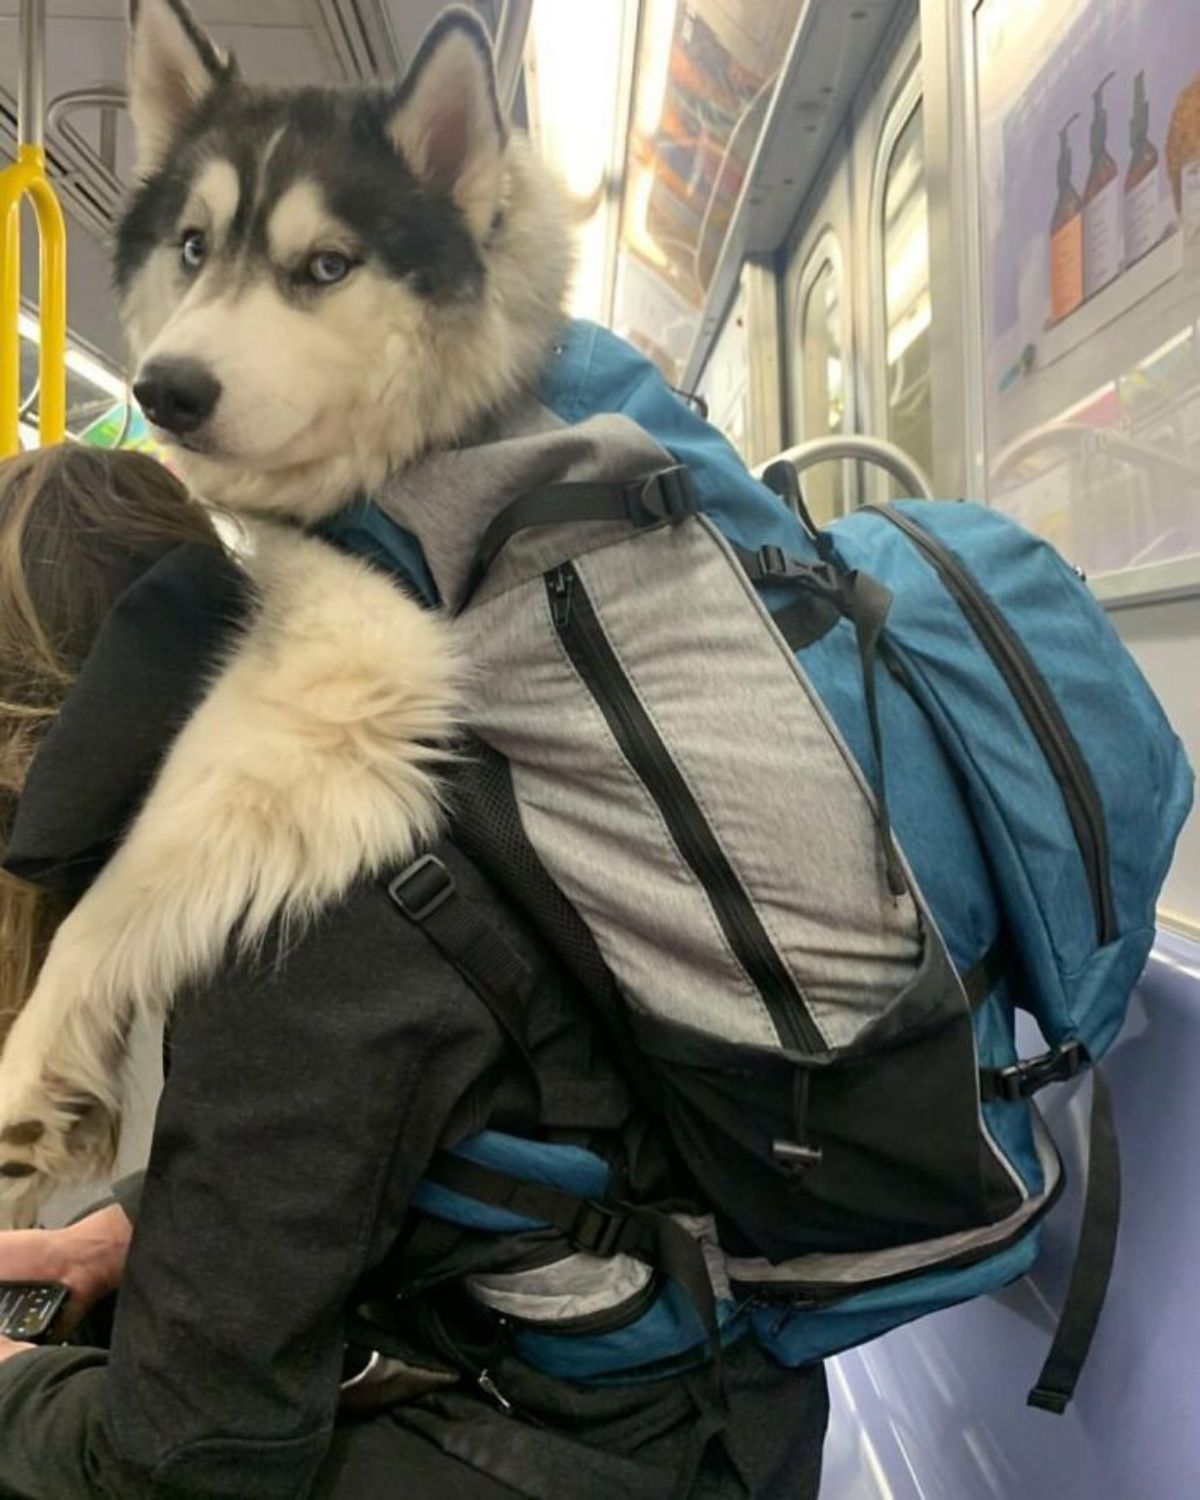 black and white husky in a blue and grey backpack being worn by someone on public transport